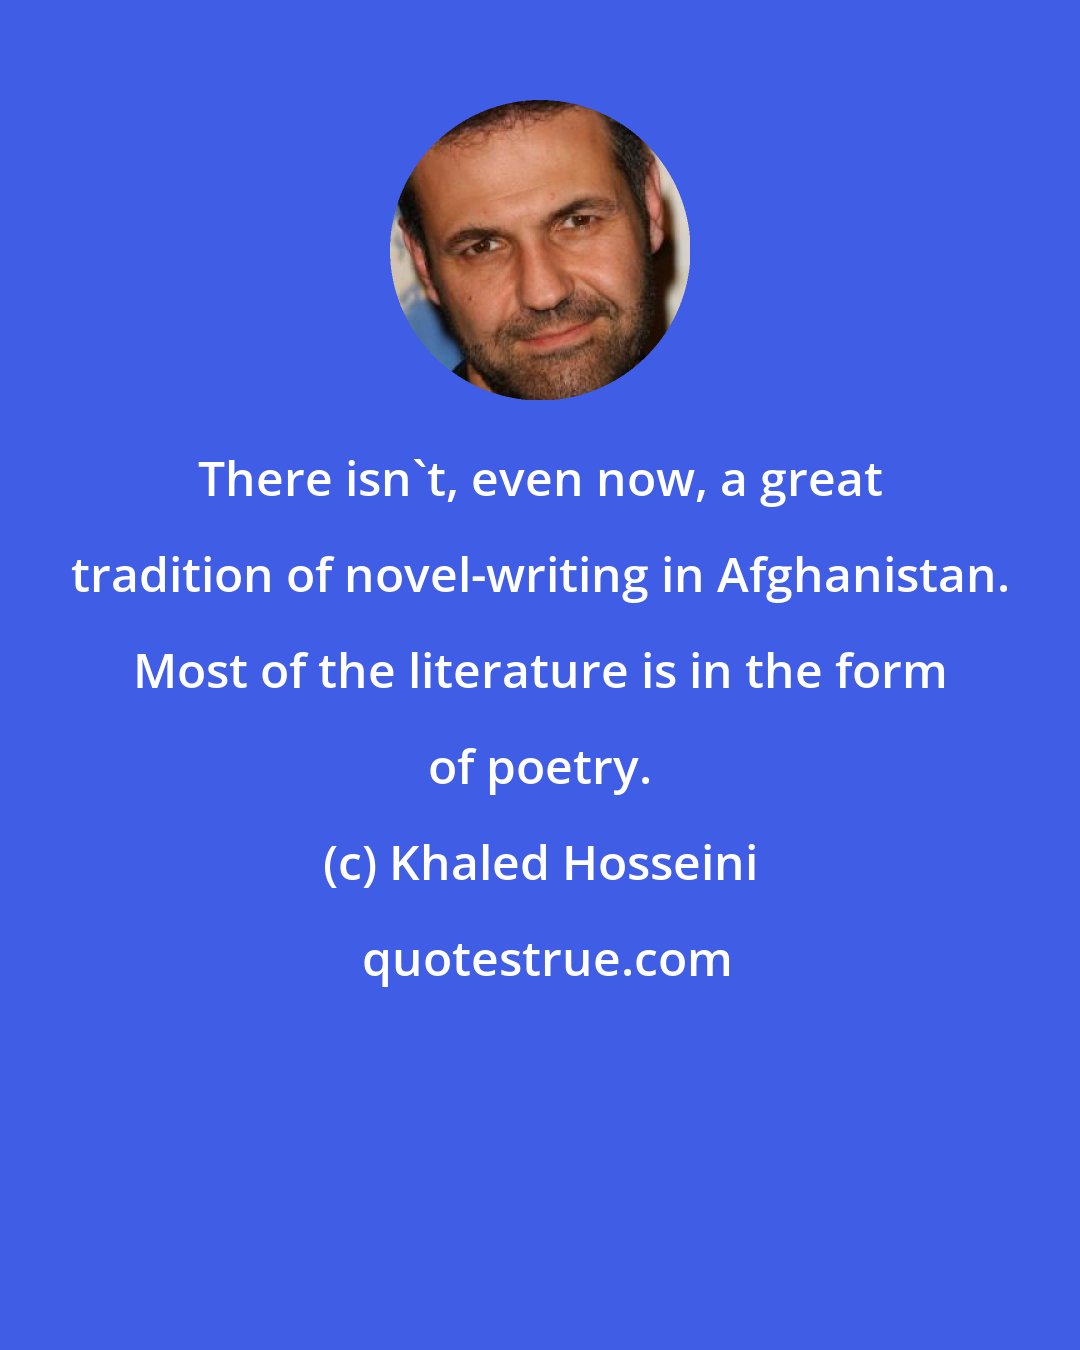 Khaled Hosseini: There isn't, even now, a great tradition of novel-writing in Afghanistan. Most of the literature is in the form of poetry.